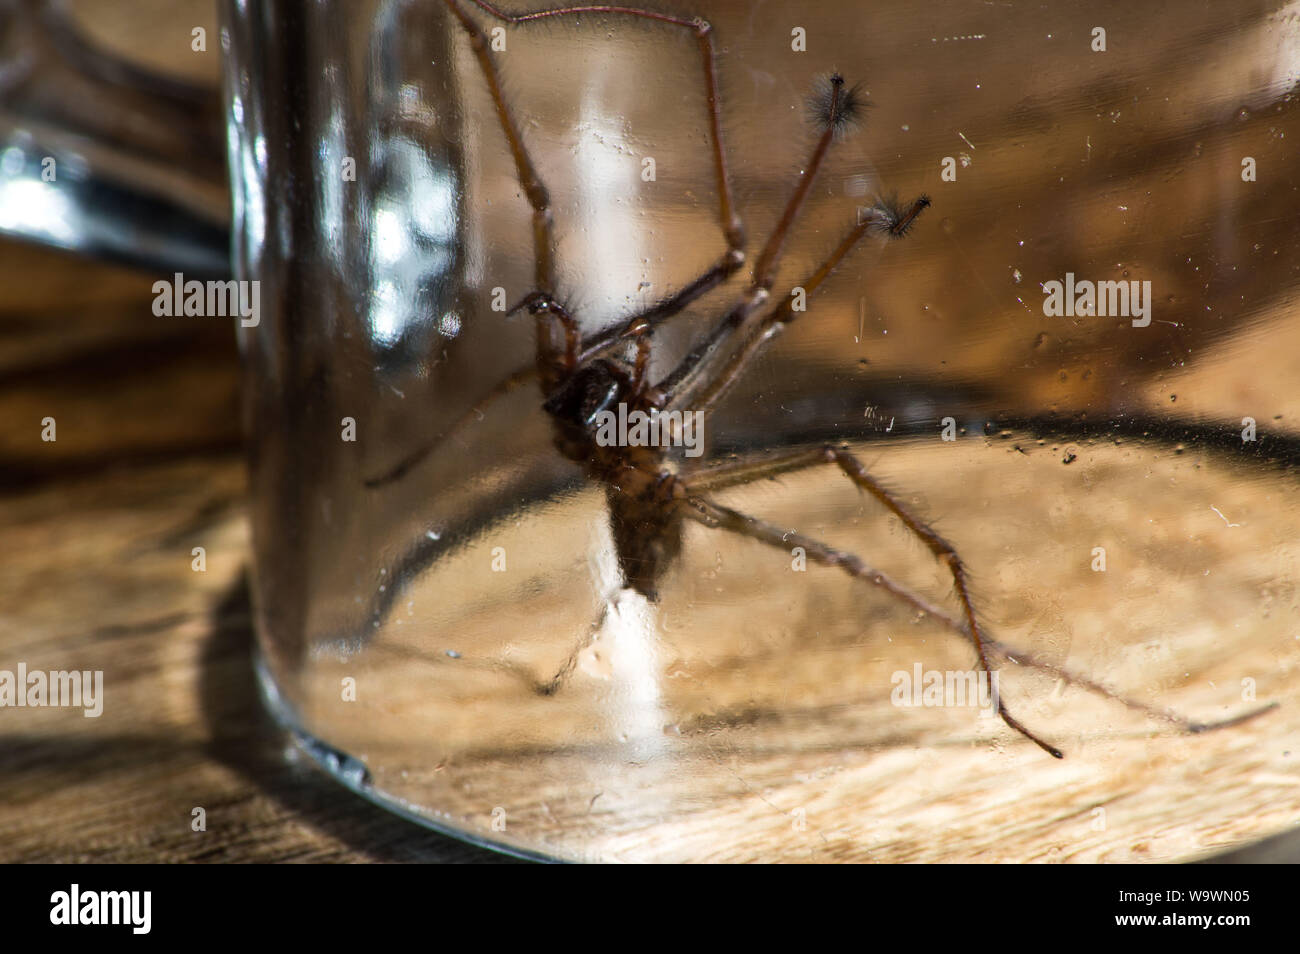 Glasgow, UK. 15 August 2019.  Its that time of year again, after a particularly hot and wet summer, providing ideal conditions for these massive spiders to grow even bigger than normal, the UK is set for a mass invasion of Giant House Spiders. Watch where you step!  Colin Fisher/CDFIMAGES.COM Credit: Colin Fisher/Alamy Live News Stock Photo